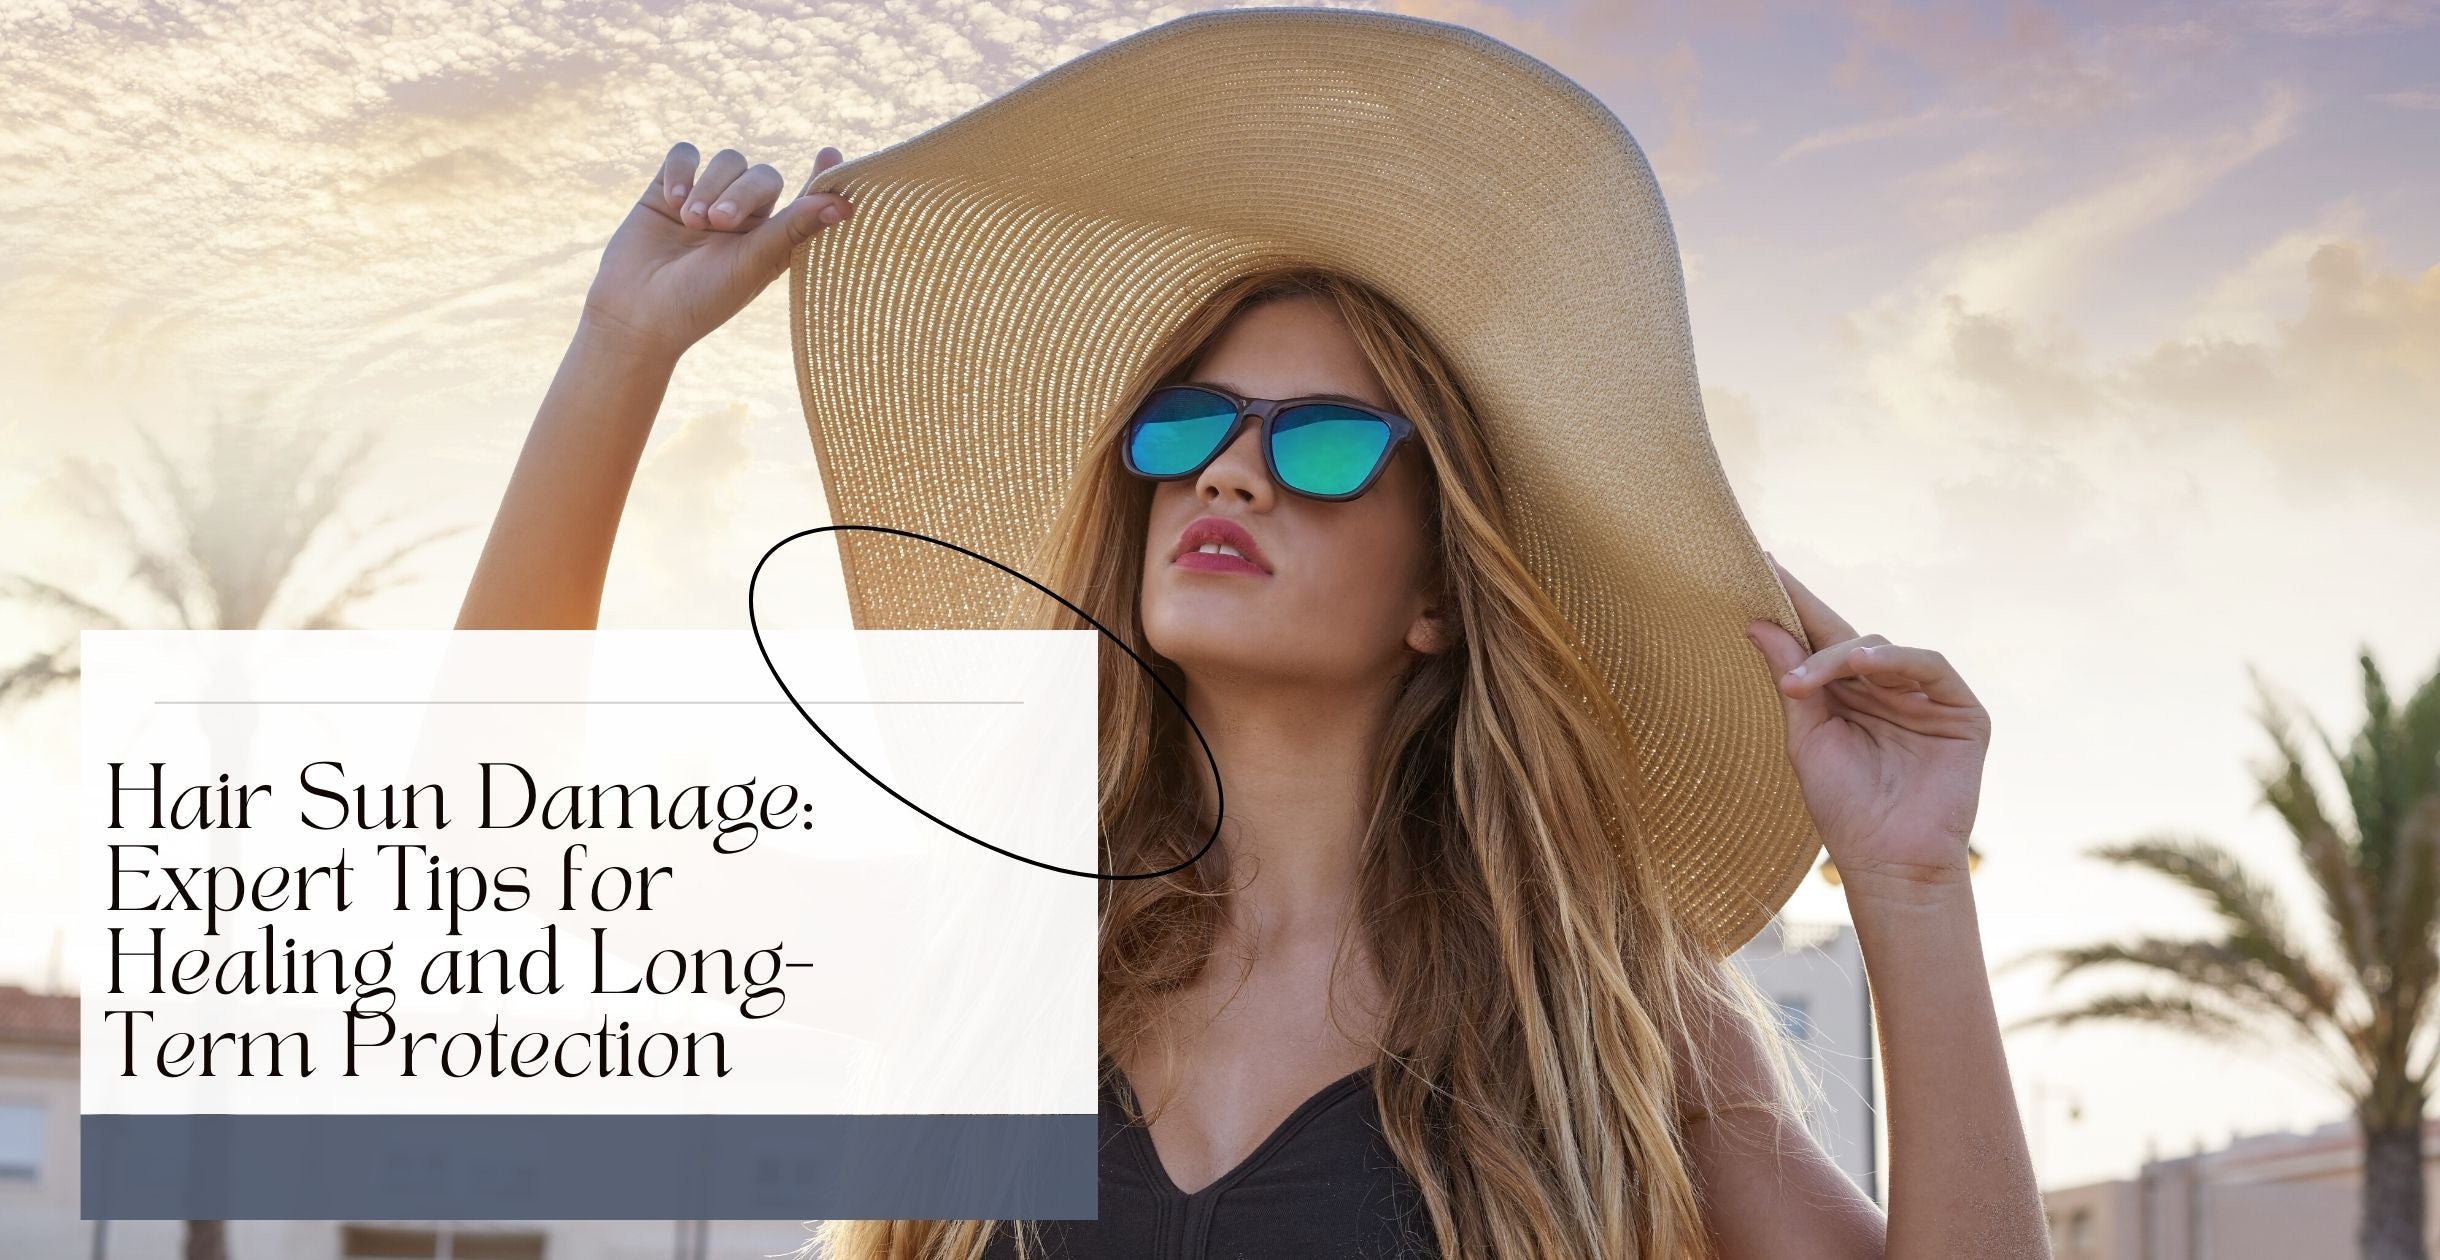 Hair Sun Damage: Expert Tips for Healing and Long-Term Protection